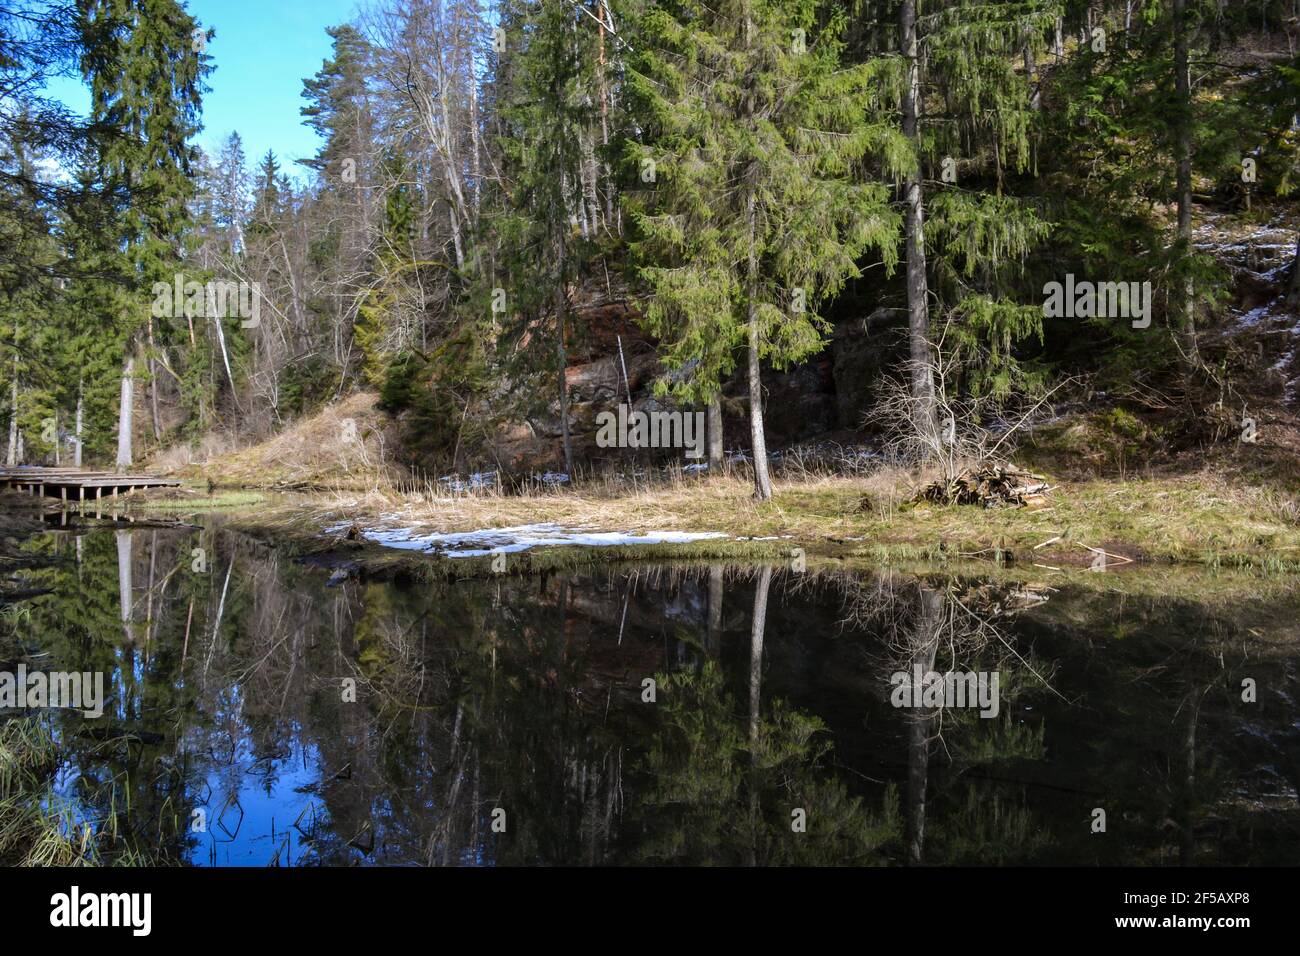 Beautiful river surrounded by forest with perfectly clean water with a beautiful reflection of the forest landscape and green trees. Spring landscape Stock Photo